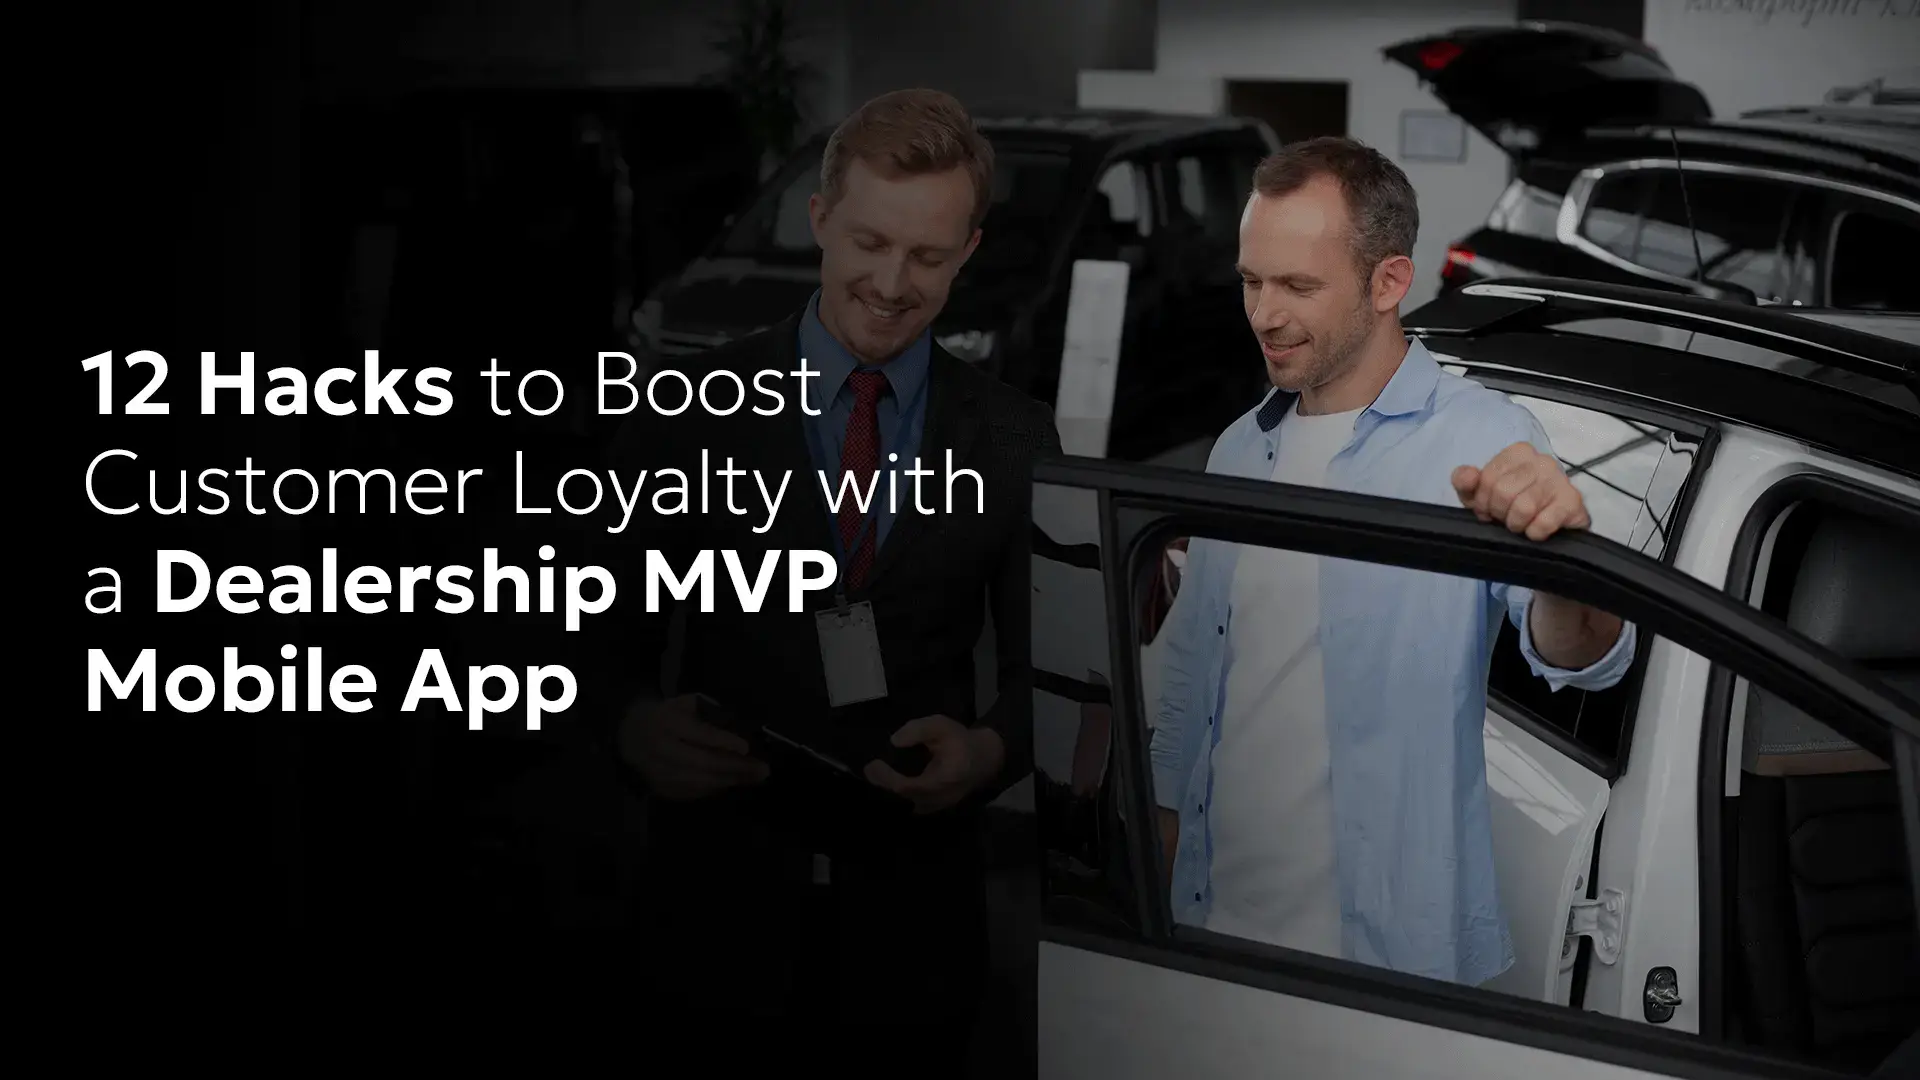 12 Hacks to Boost Customer Loyalty with a Dealership MVP Mobile App